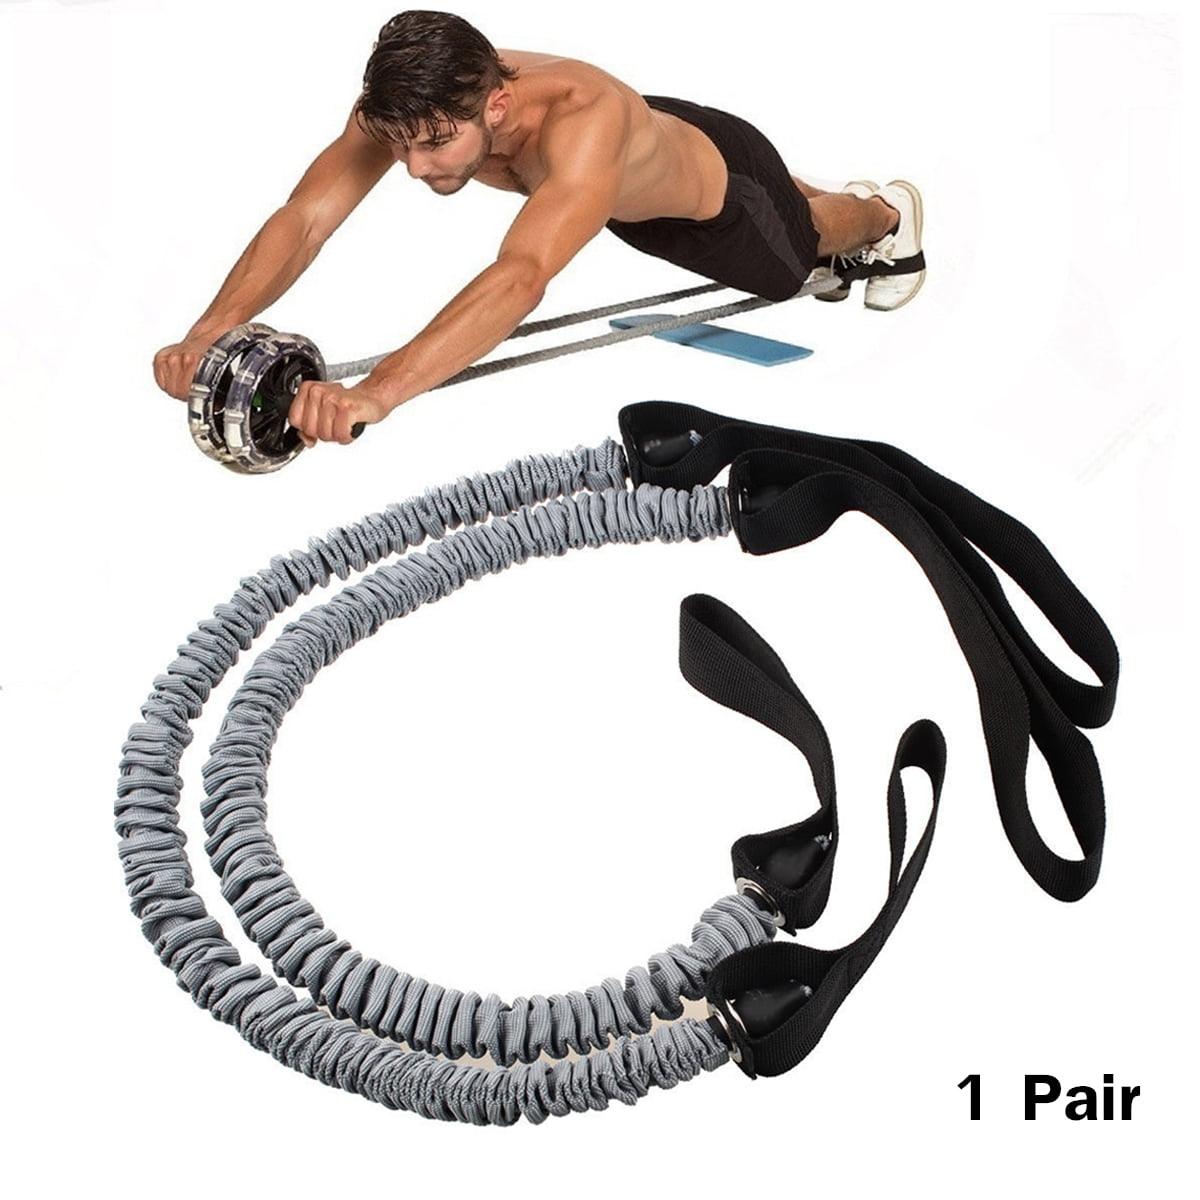 Get Double Wheel Ab Roller Pull Rope Waist Abdominal Slimming Exercise Equipment